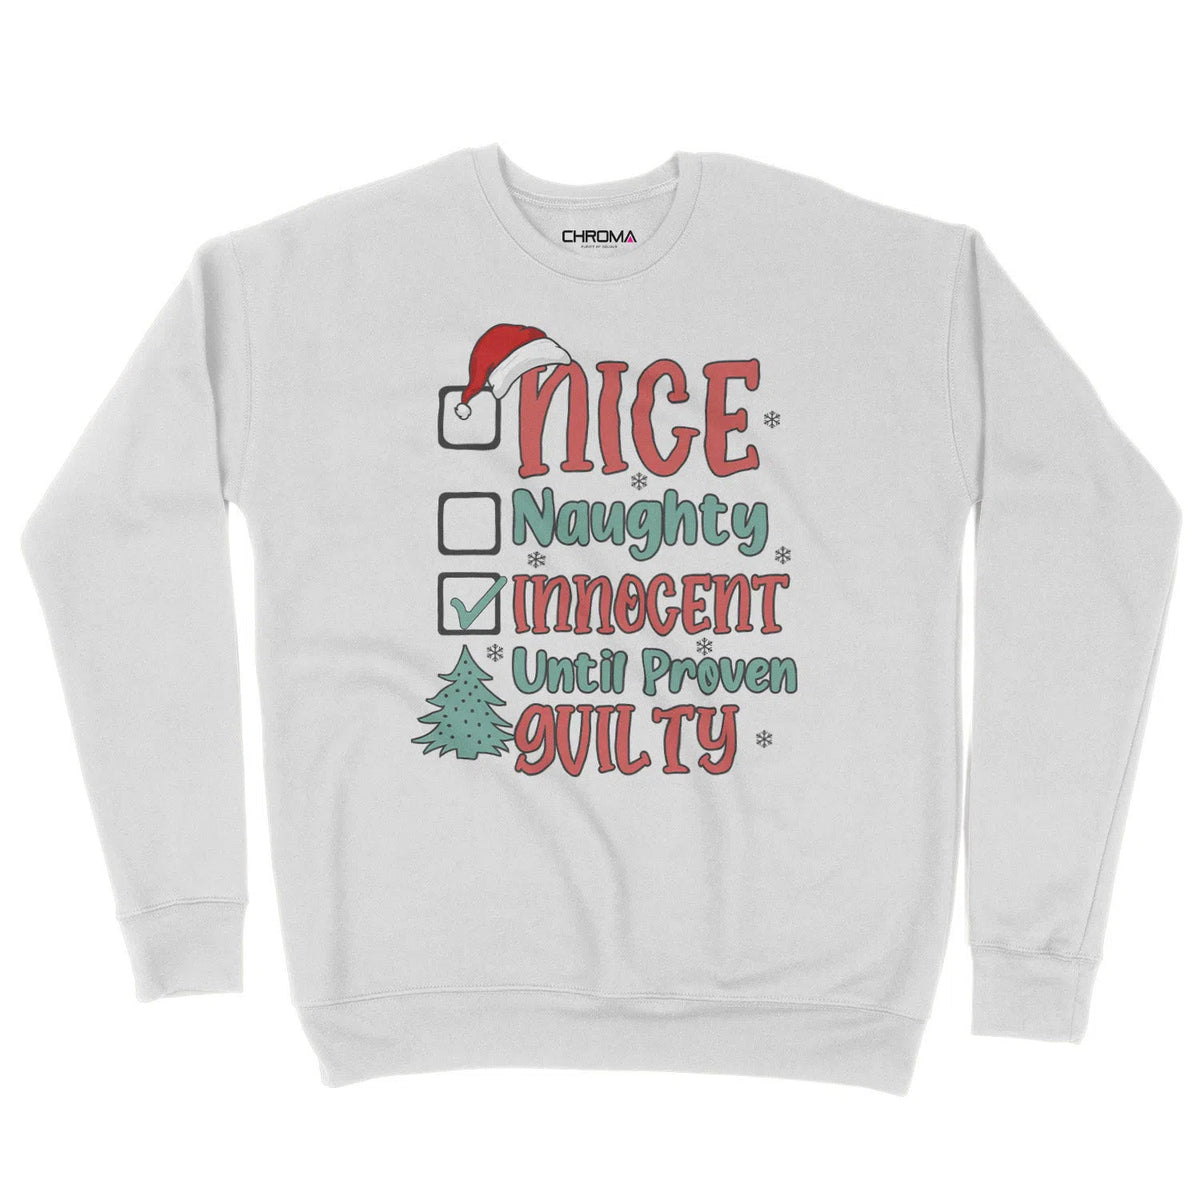 Innocent Until Proven Guilty | Unisex Christmas Sweater Chroma Clothing